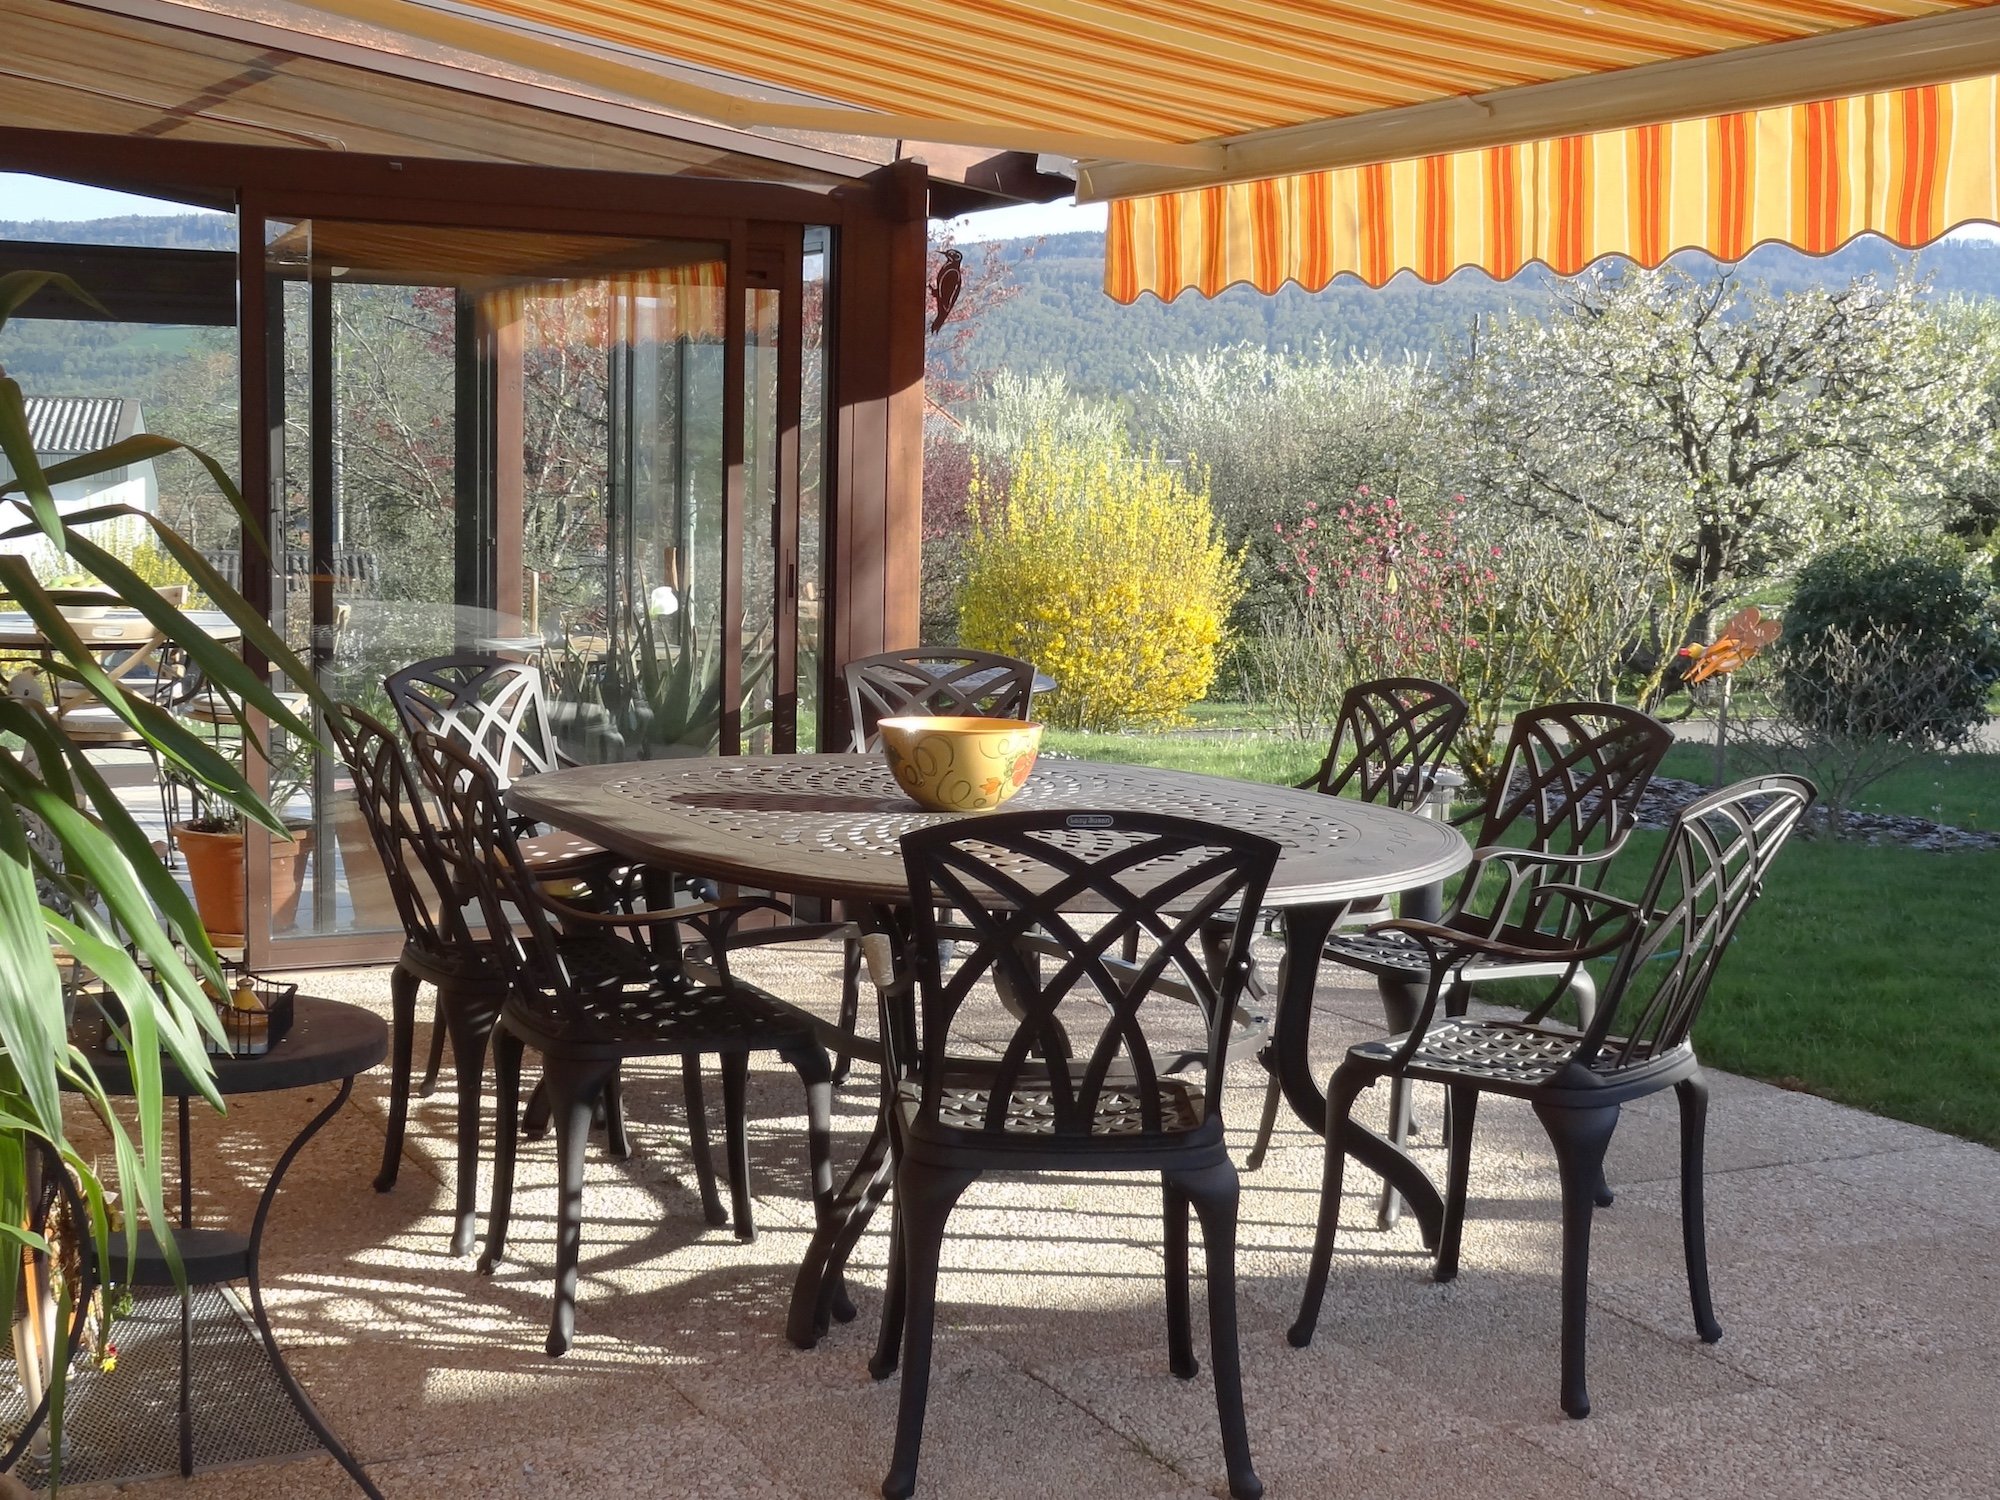 Outdoor furniture is the best solution for a covered patio